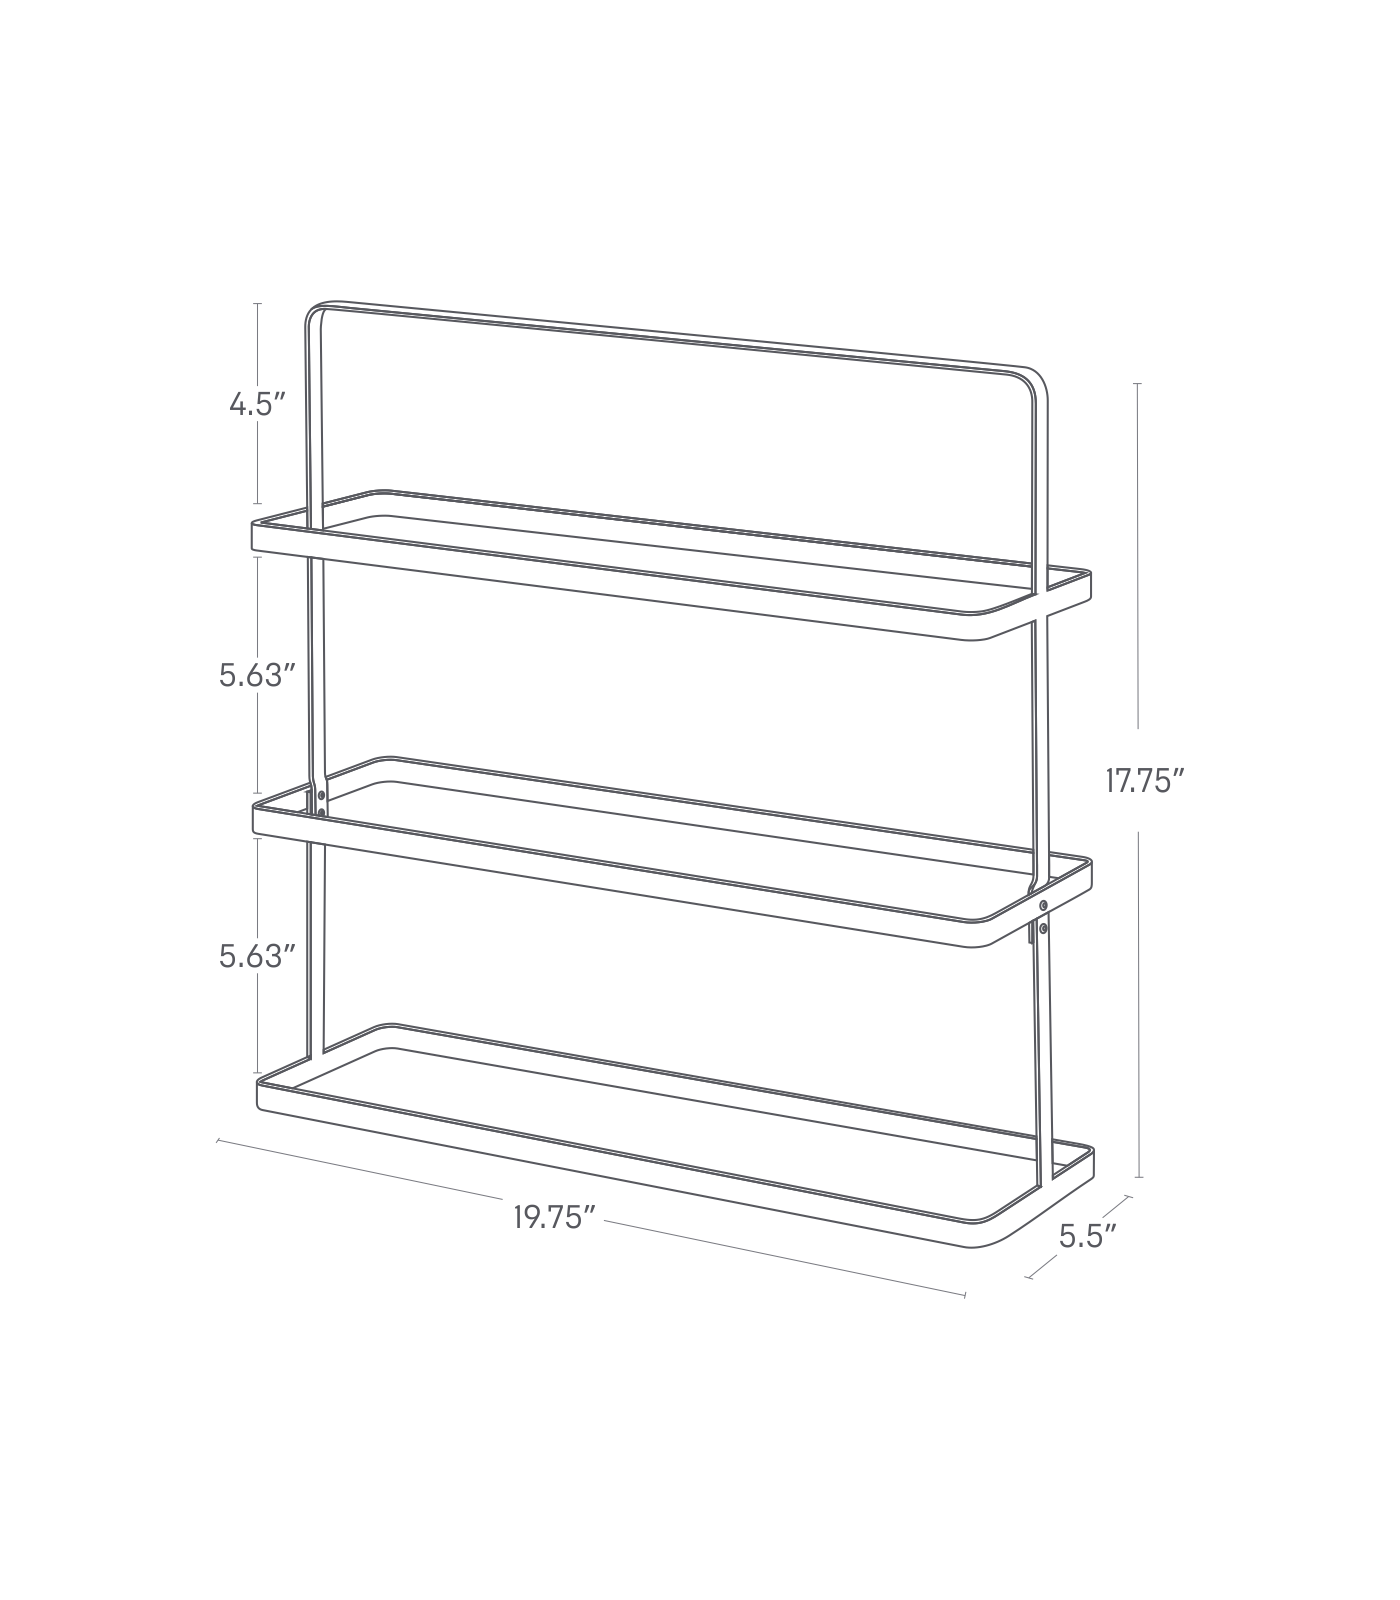 Dimension image for Shoe Rack - Two Styles on a white background including dimensions  L 5.51 x W 19.69 x H 17.91 inches